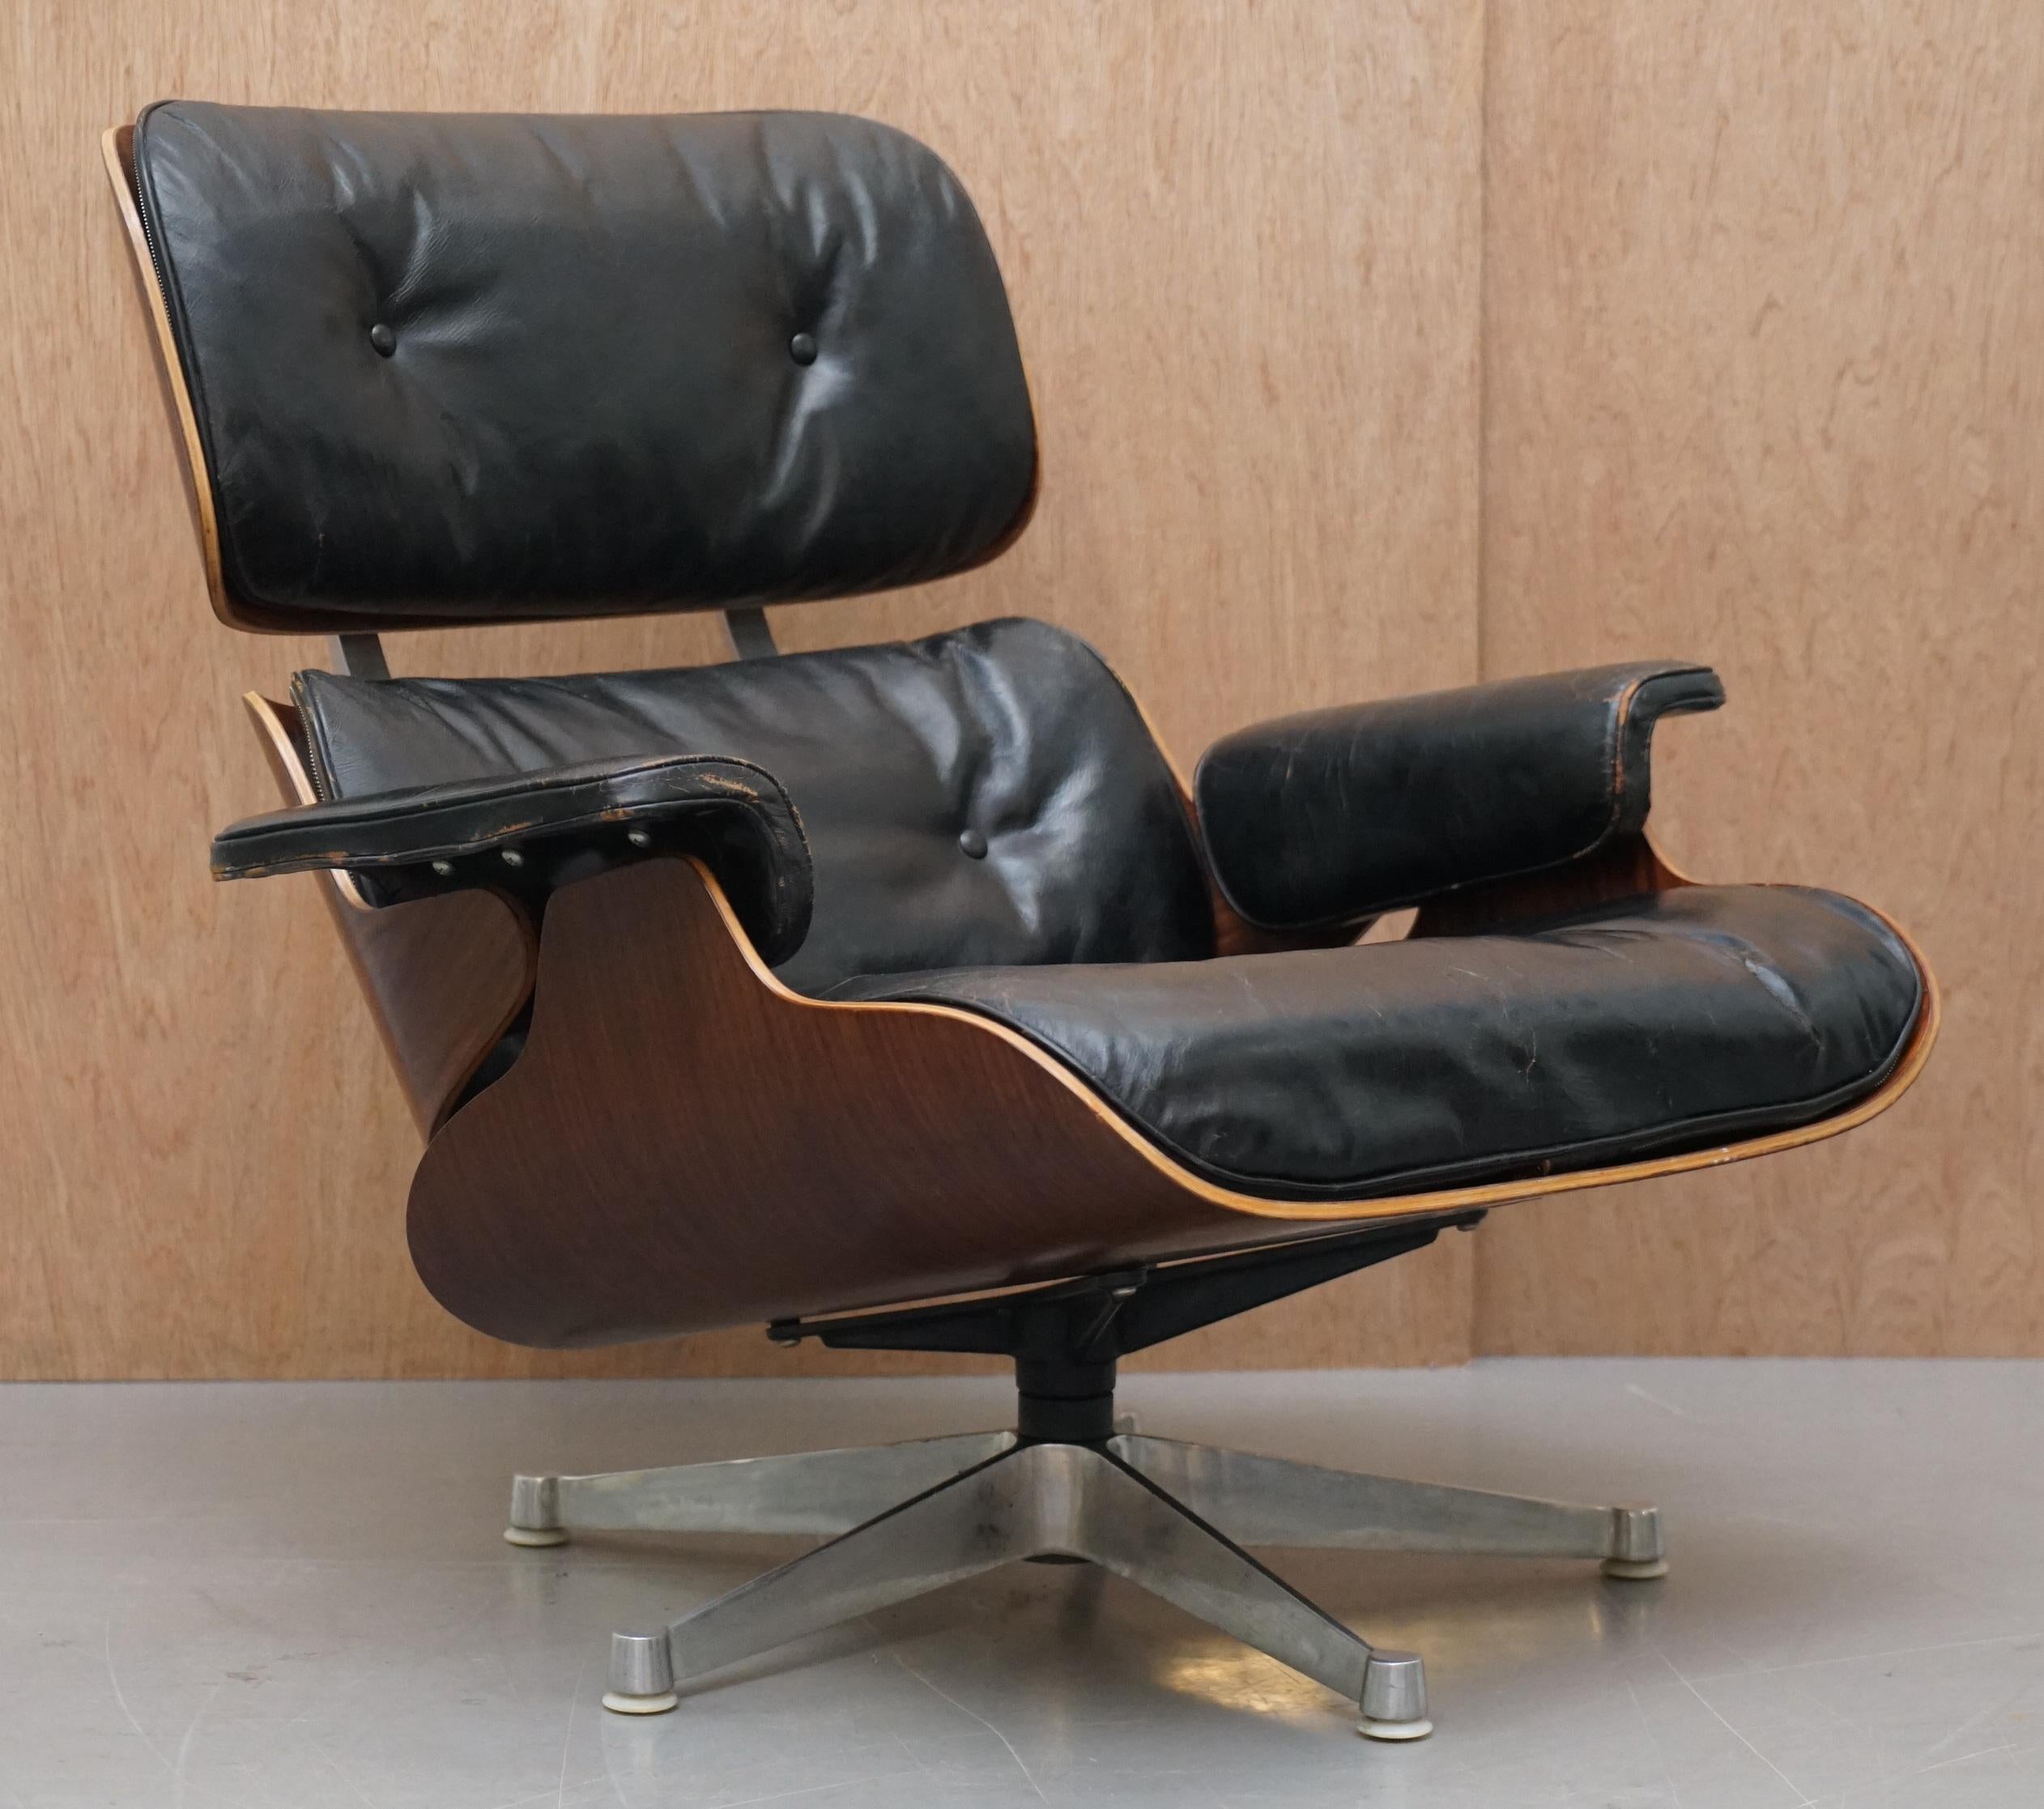 We are delighted to offer for sale this exceptionally rare original late 1960s Charles & Ray Eames 670 & 671 black leather hardwood framed Lounge armchair and ottoman, fully stamped with the Herman Miller Hille Labels

Well….. if your looking at